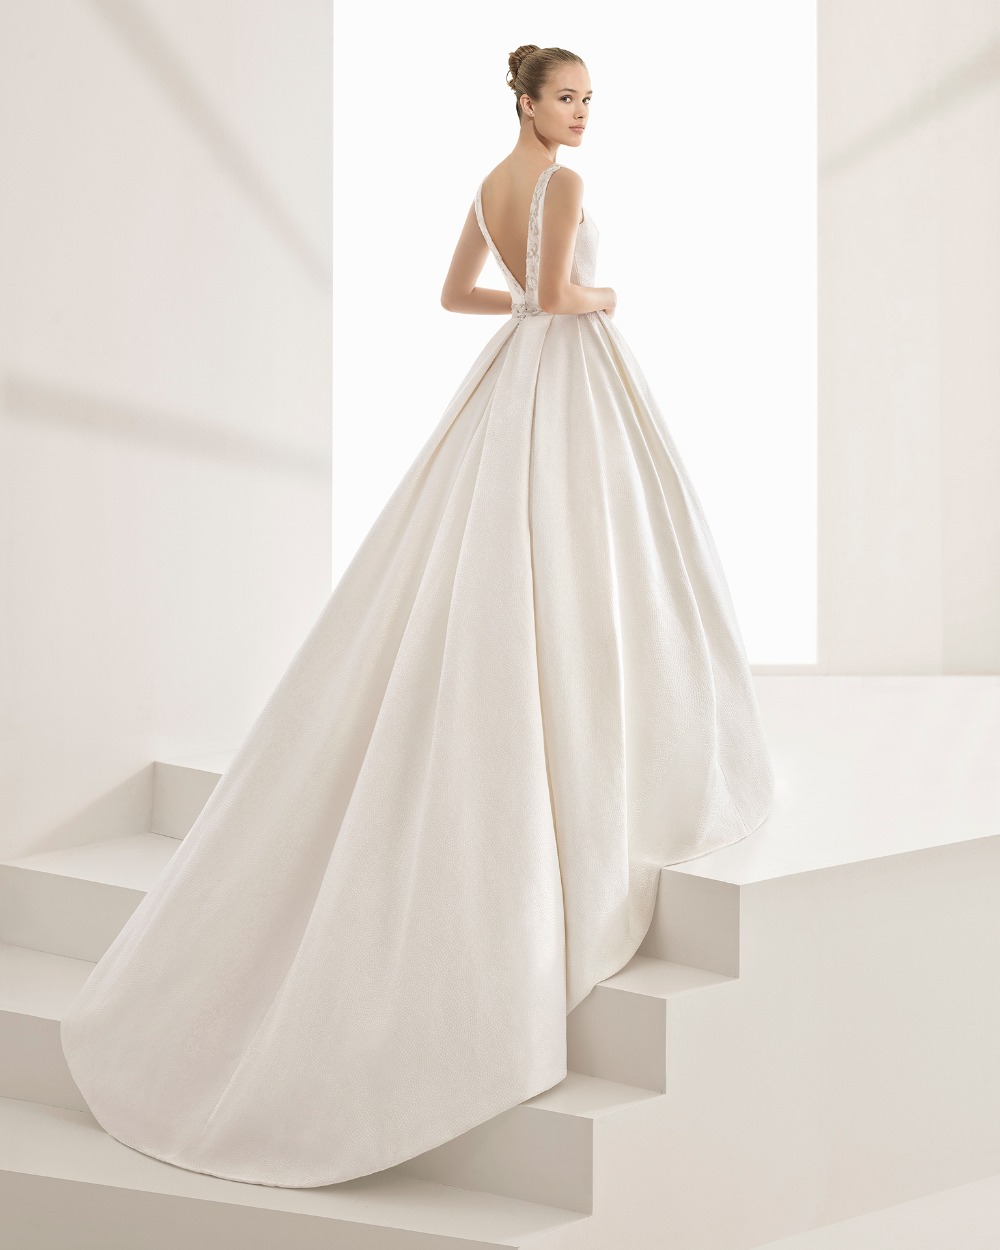 Elegant and Timeless Couture Wedding Dress Collection By Rosa Clará